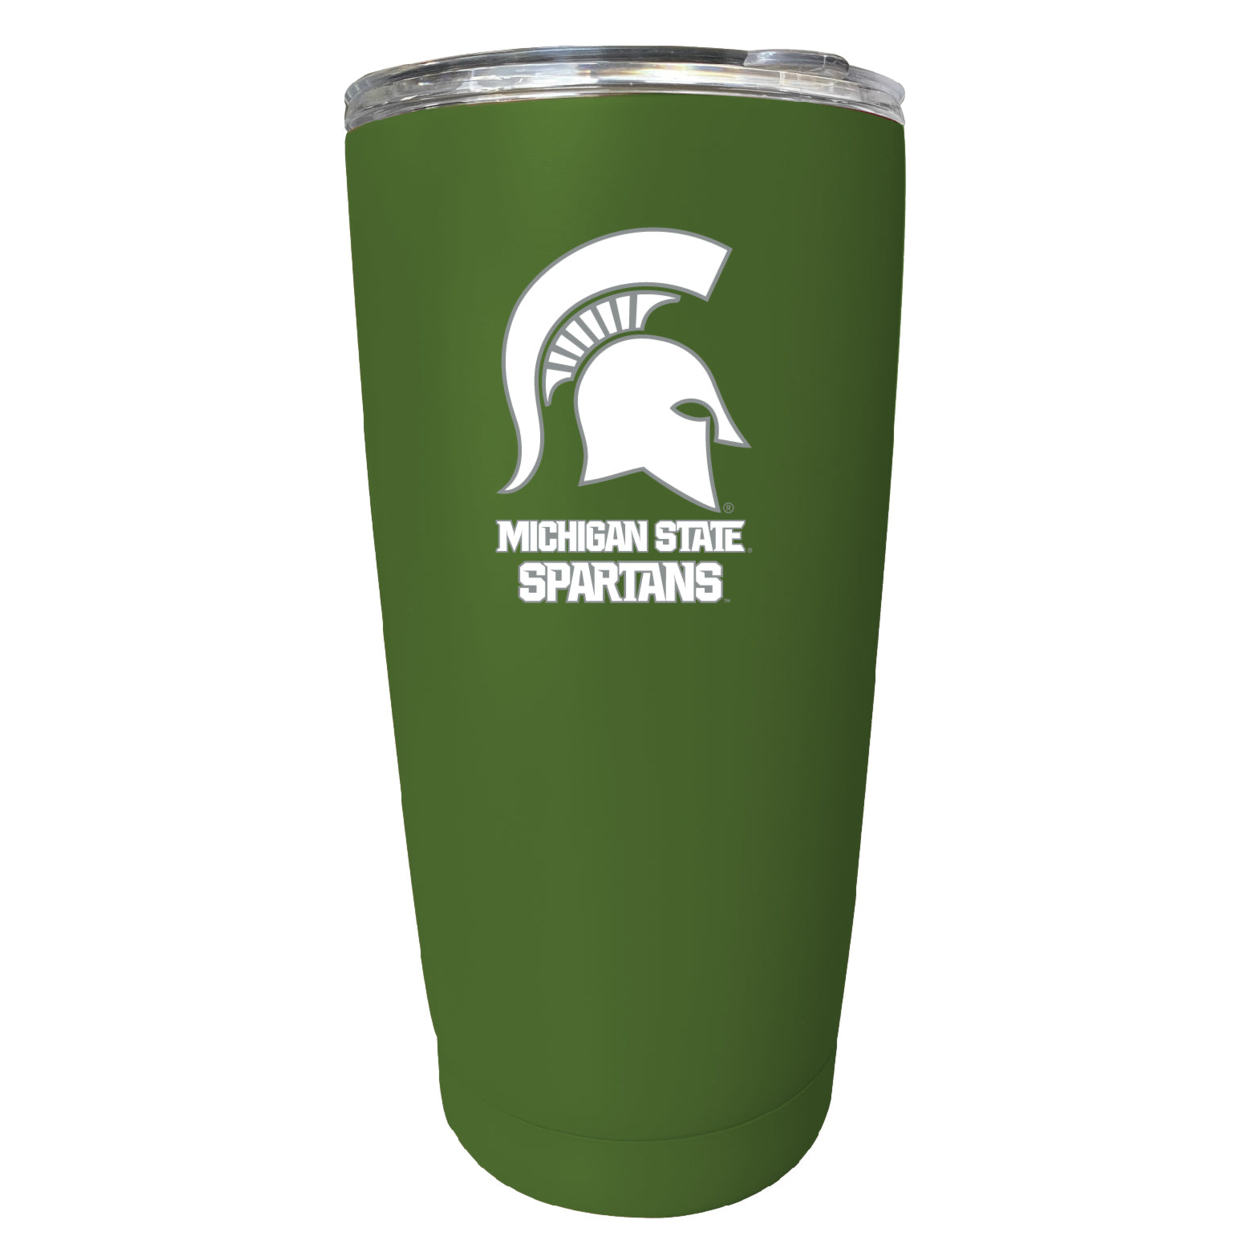 Michigan State Spartans 16 Oz Stainless Steel Insulated Tumbler - Pink